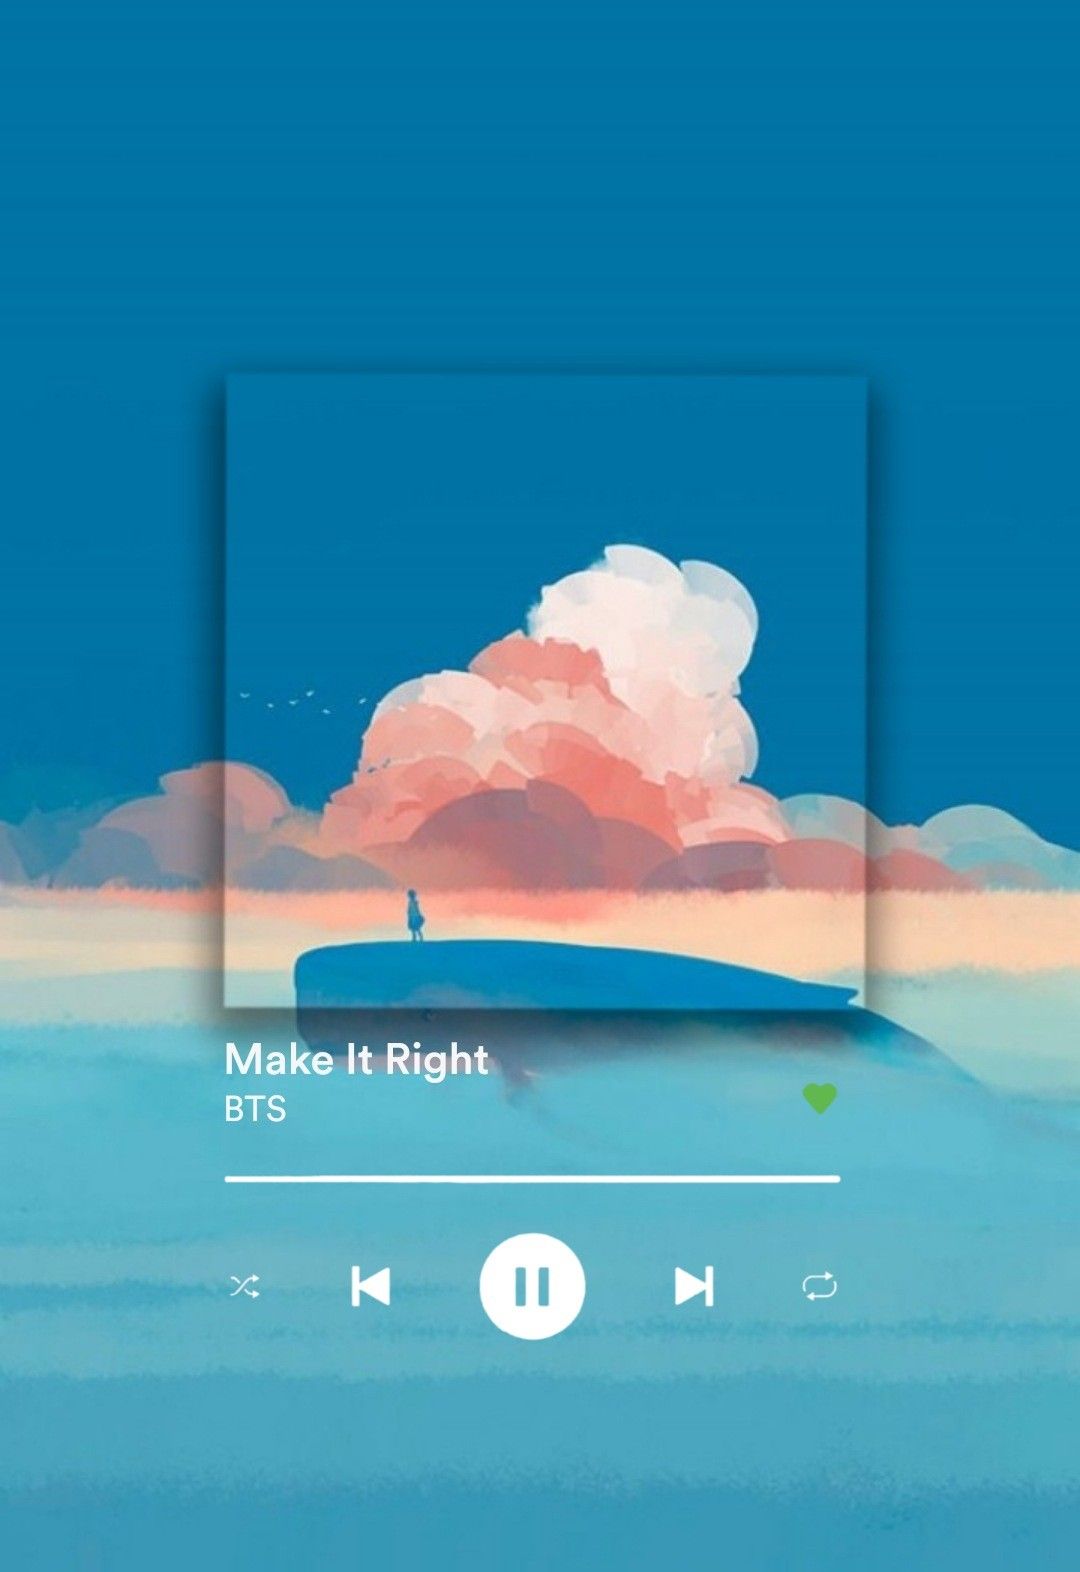 A screenshot of the music player on an android phone - Spotify